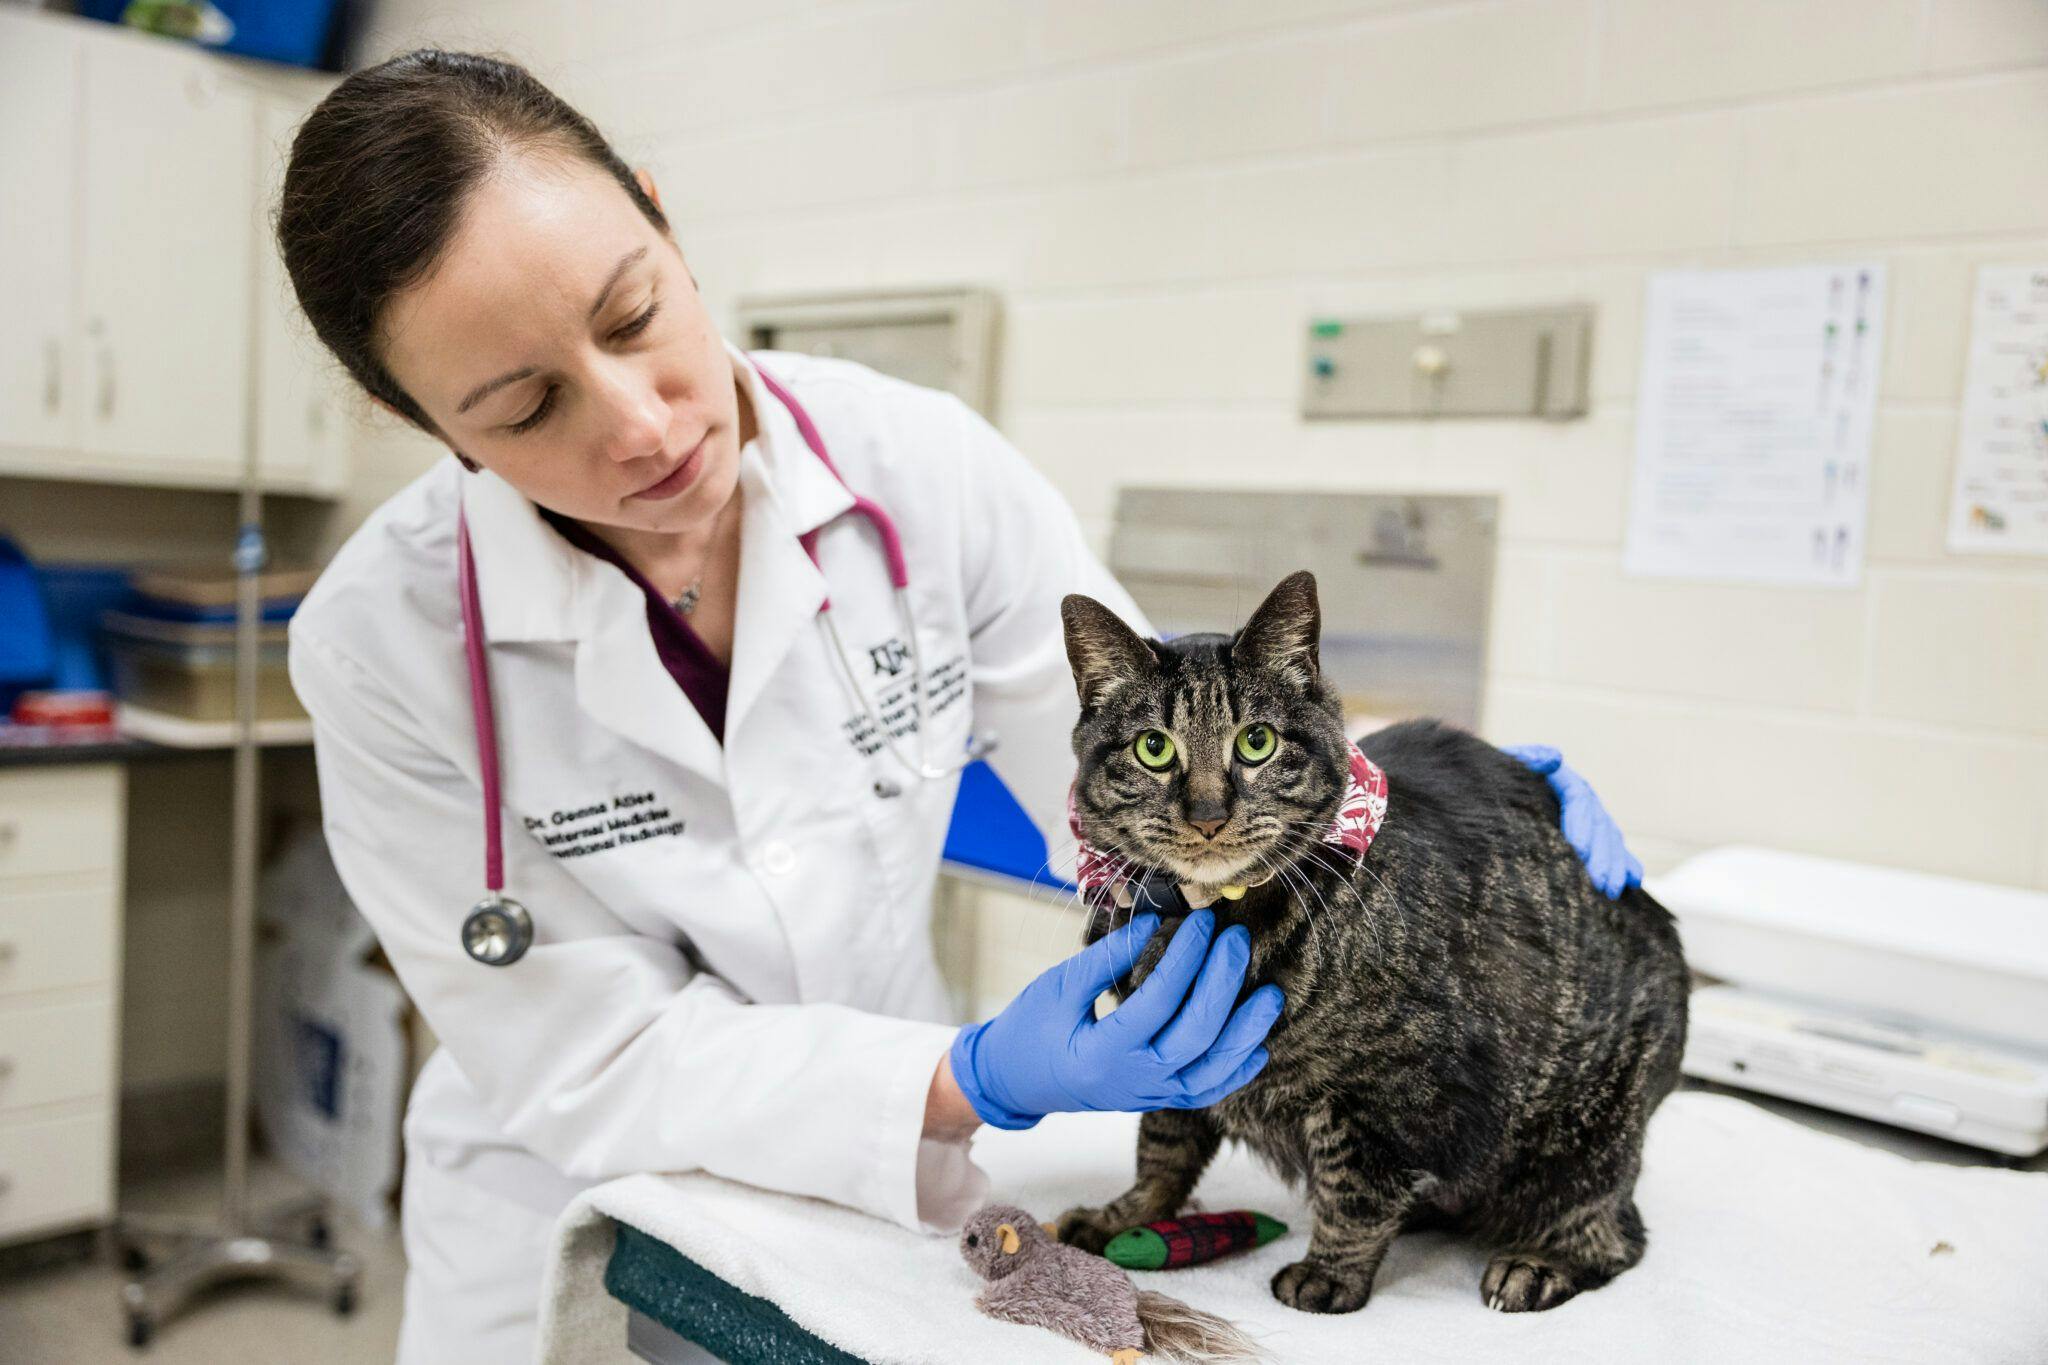 Genna Atiee, DVM, DACVIM (SAIM), a clinical assistant professor in the Texas A&M University School of Veterinary Medicine & Biomedical Sciences, examines Kobe. (Photo credit: Jason Nitsch ’14, Texas A&M University Division of Marketing and Communications)